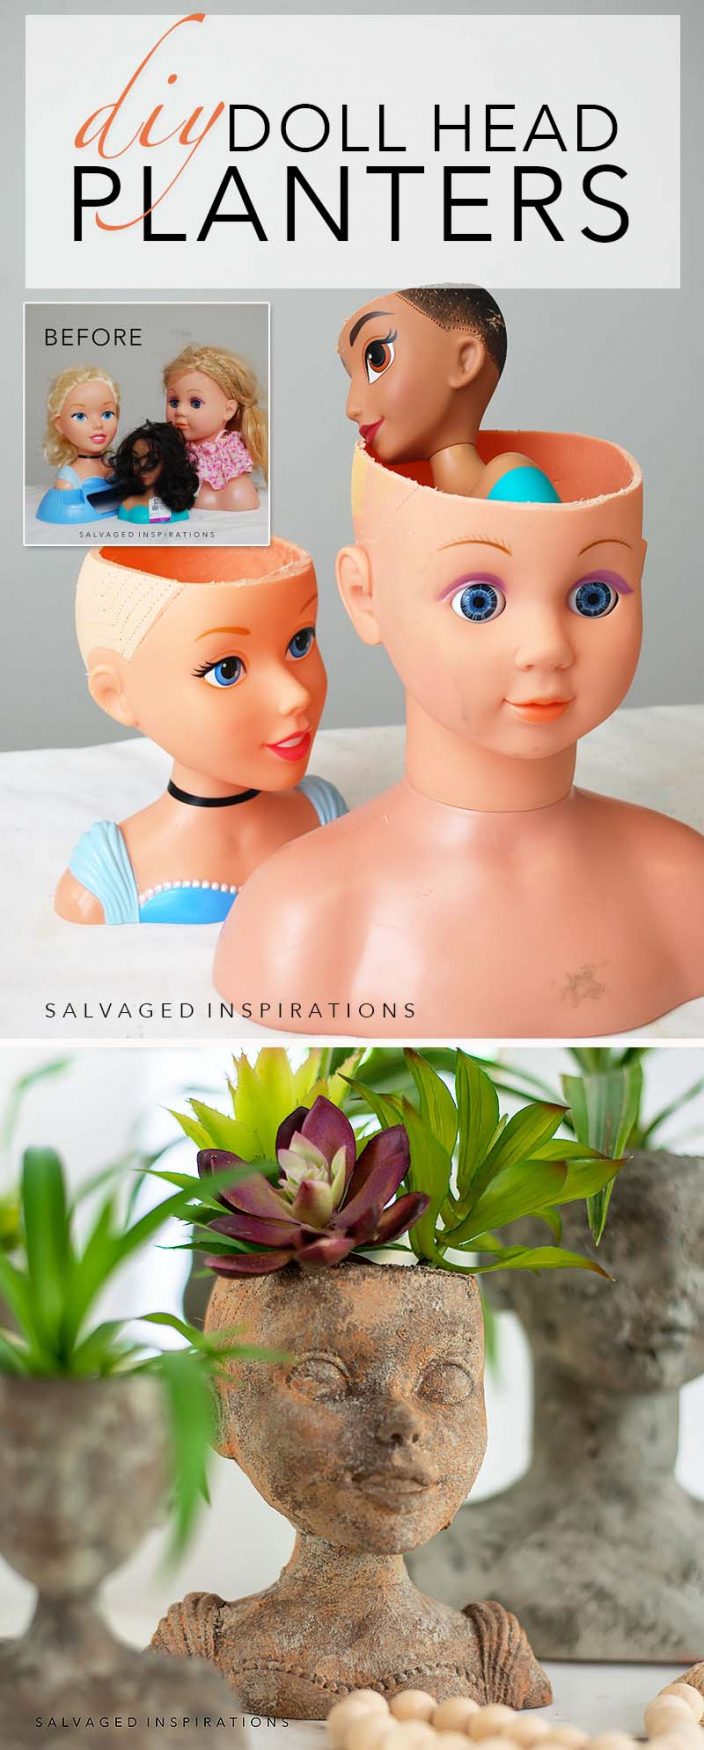 DIY Doll Head Planters Before and After